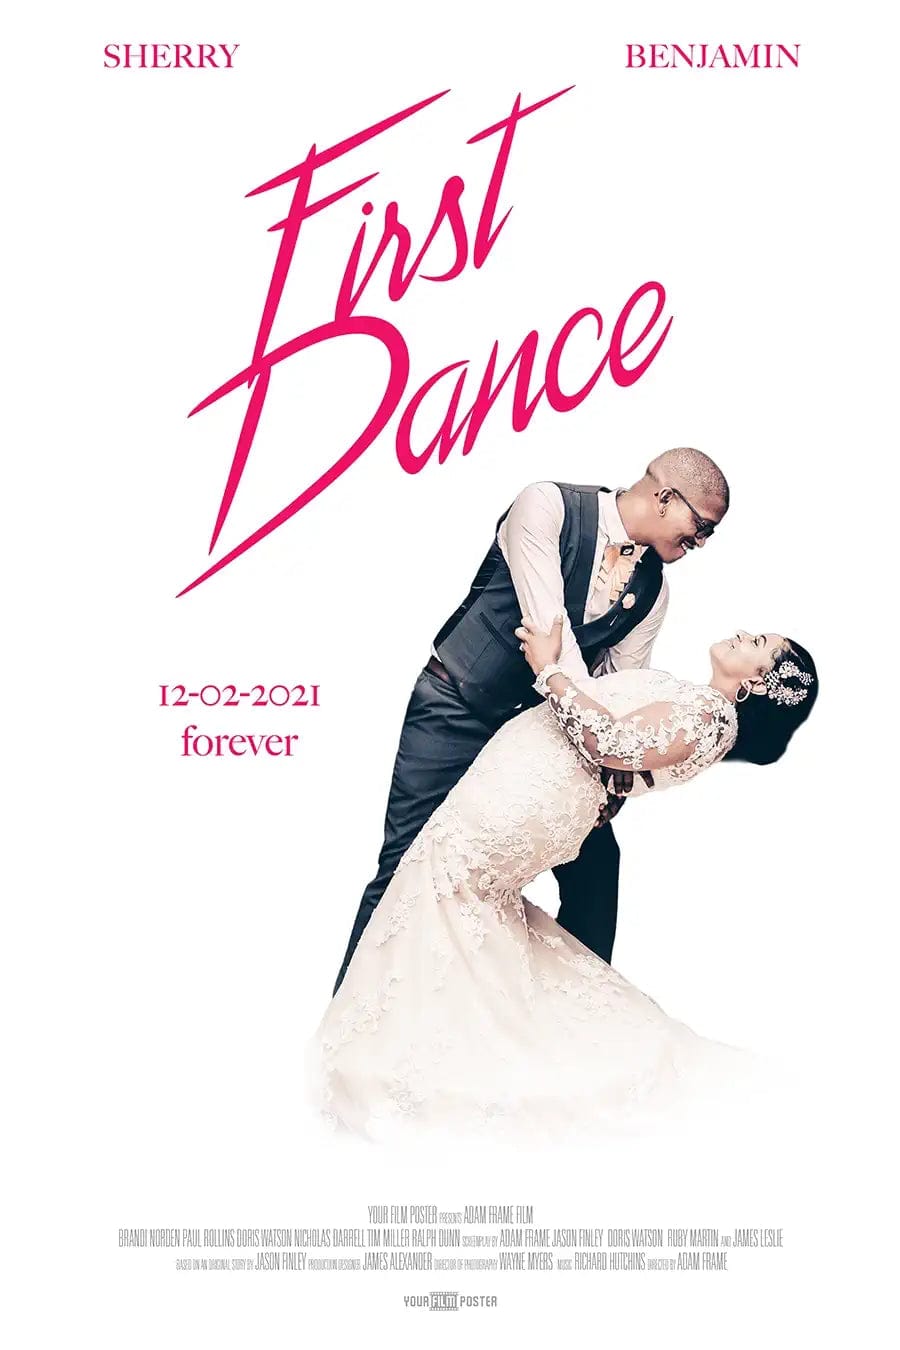 Dirty Dancing inspiring personalizable movie poster, showing a wedding dance photo called First Dance